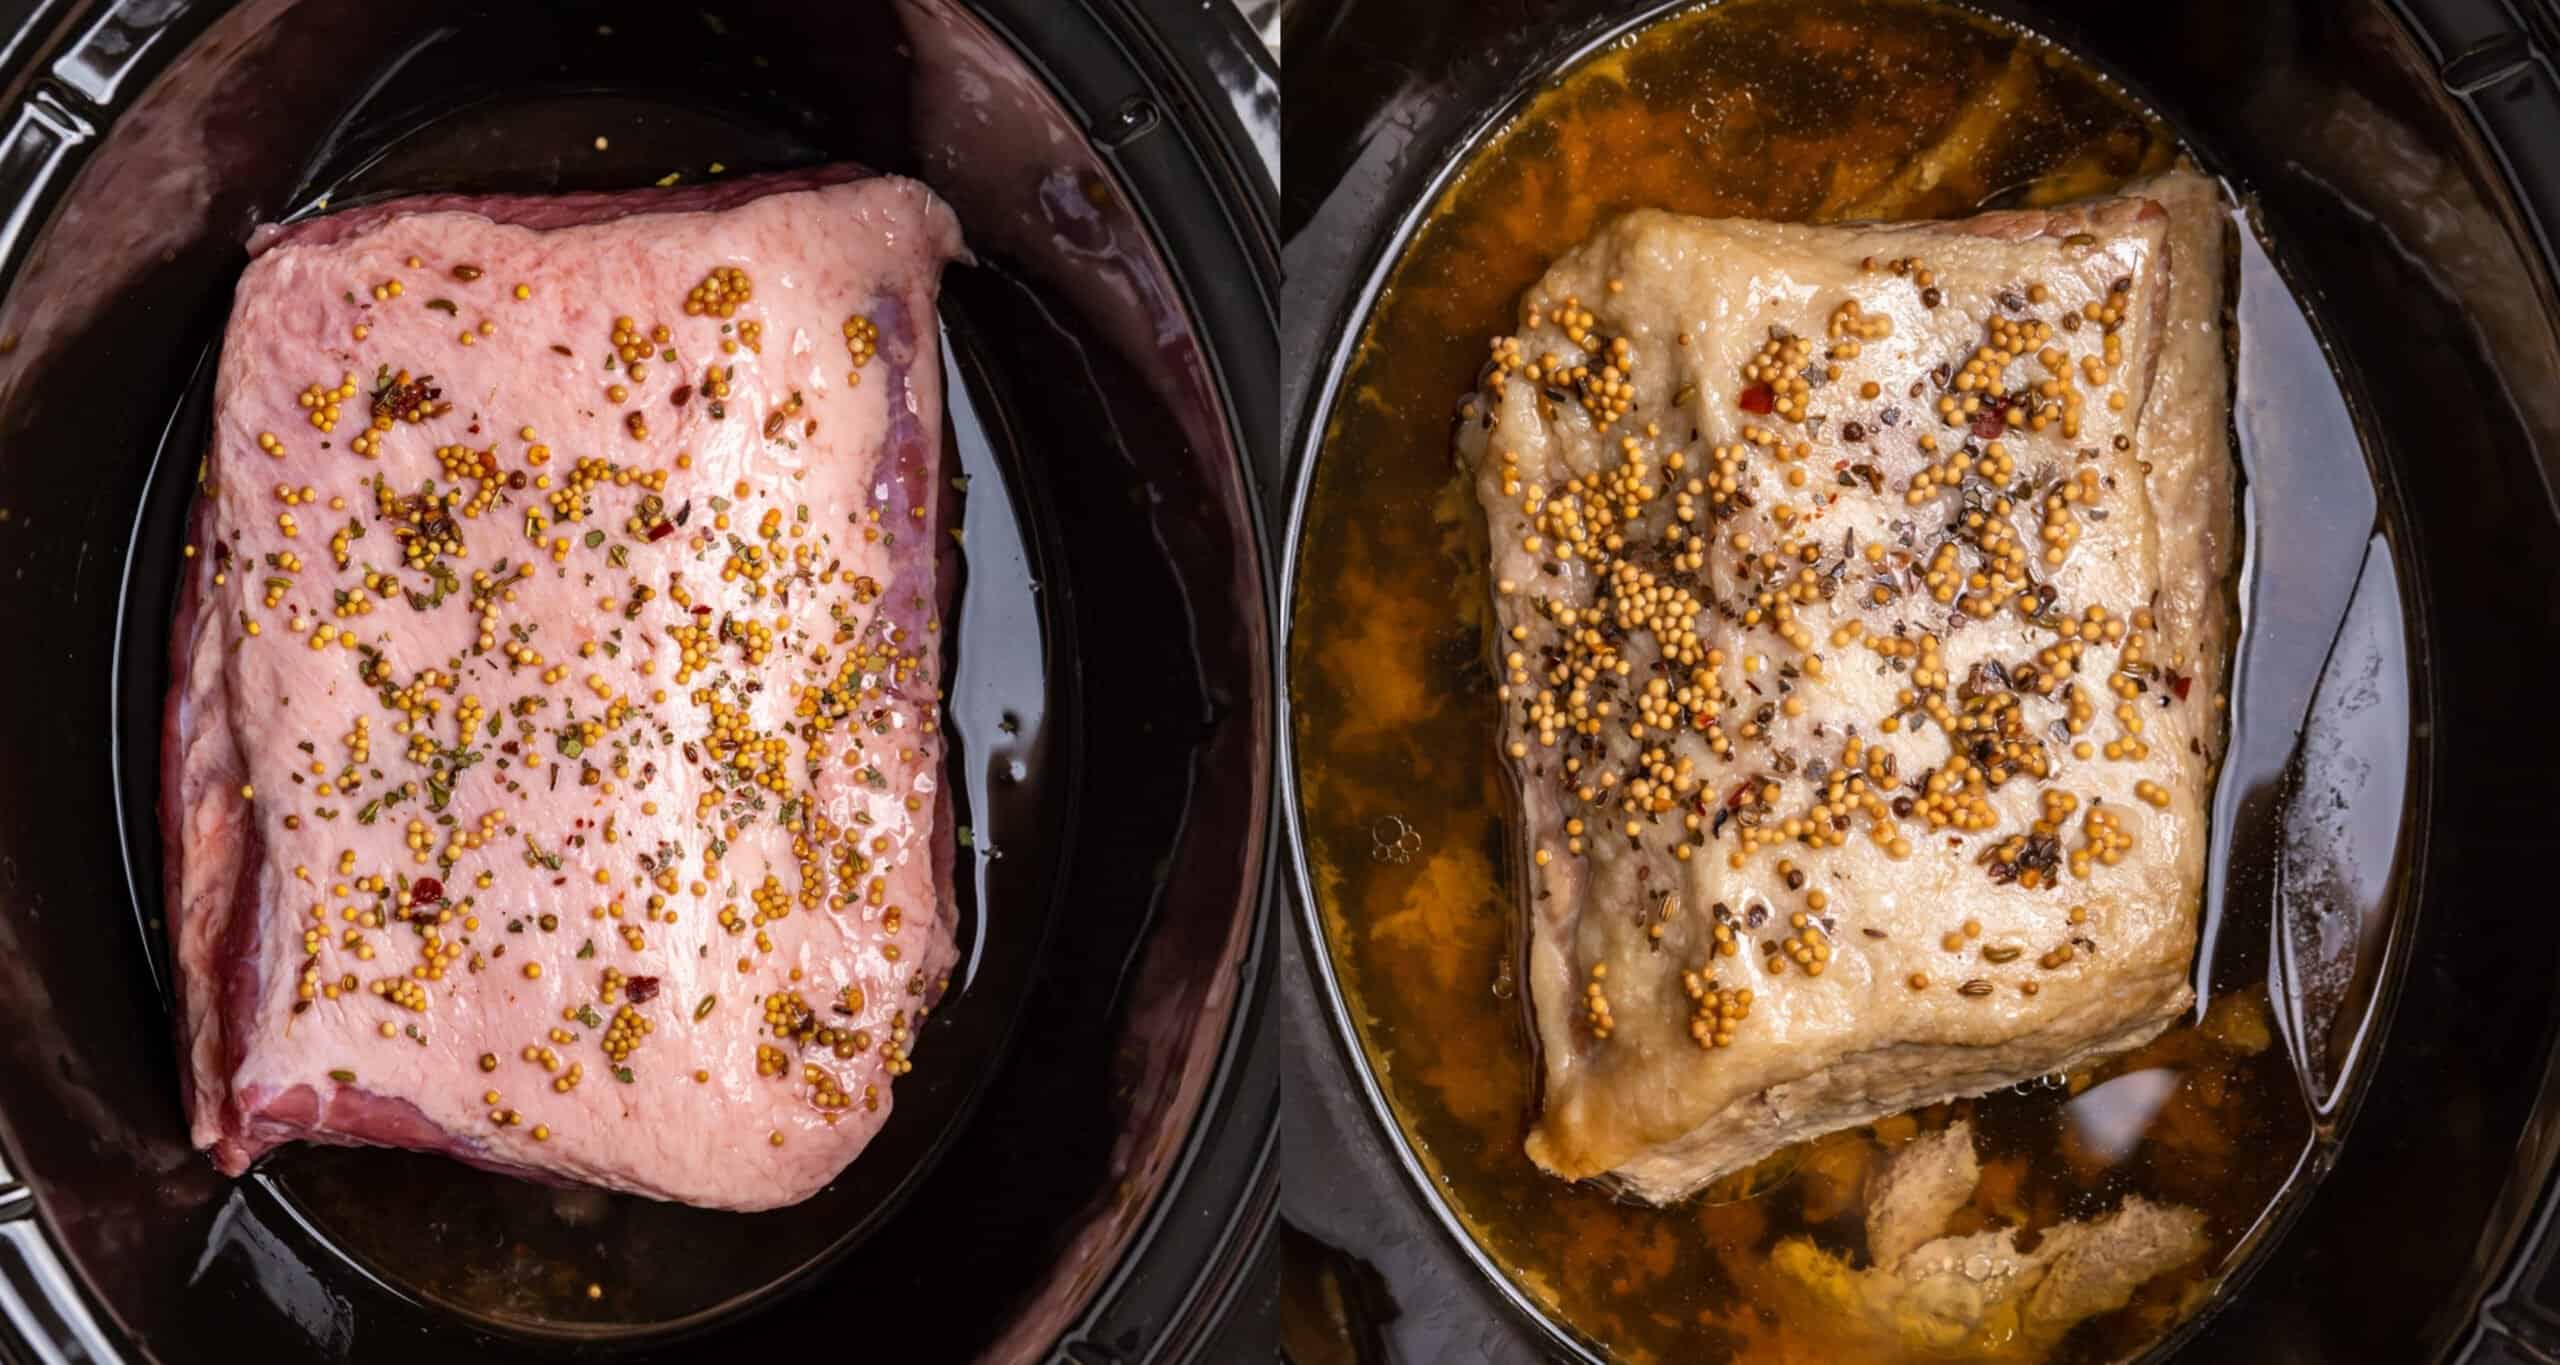 Corned beef brisket in slow cooker before and then after cooked,